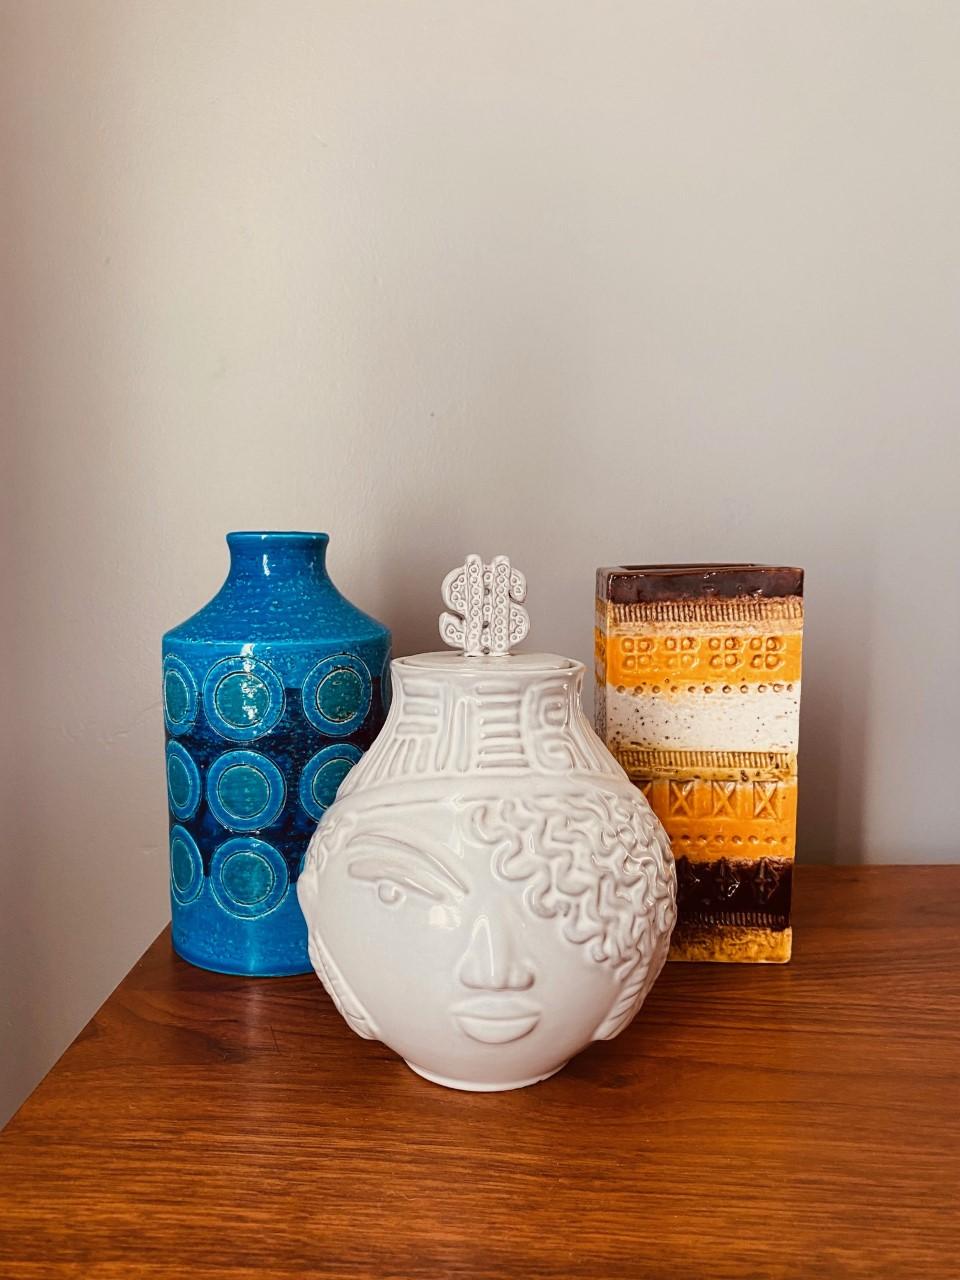 Incredibly iconic piece of pottery.  The allure of this piece transports you to the Italian coast decades past. This beautiful vase is sculptural and unique.The vase features a circle design on a vibrant blue background with slightly green centers